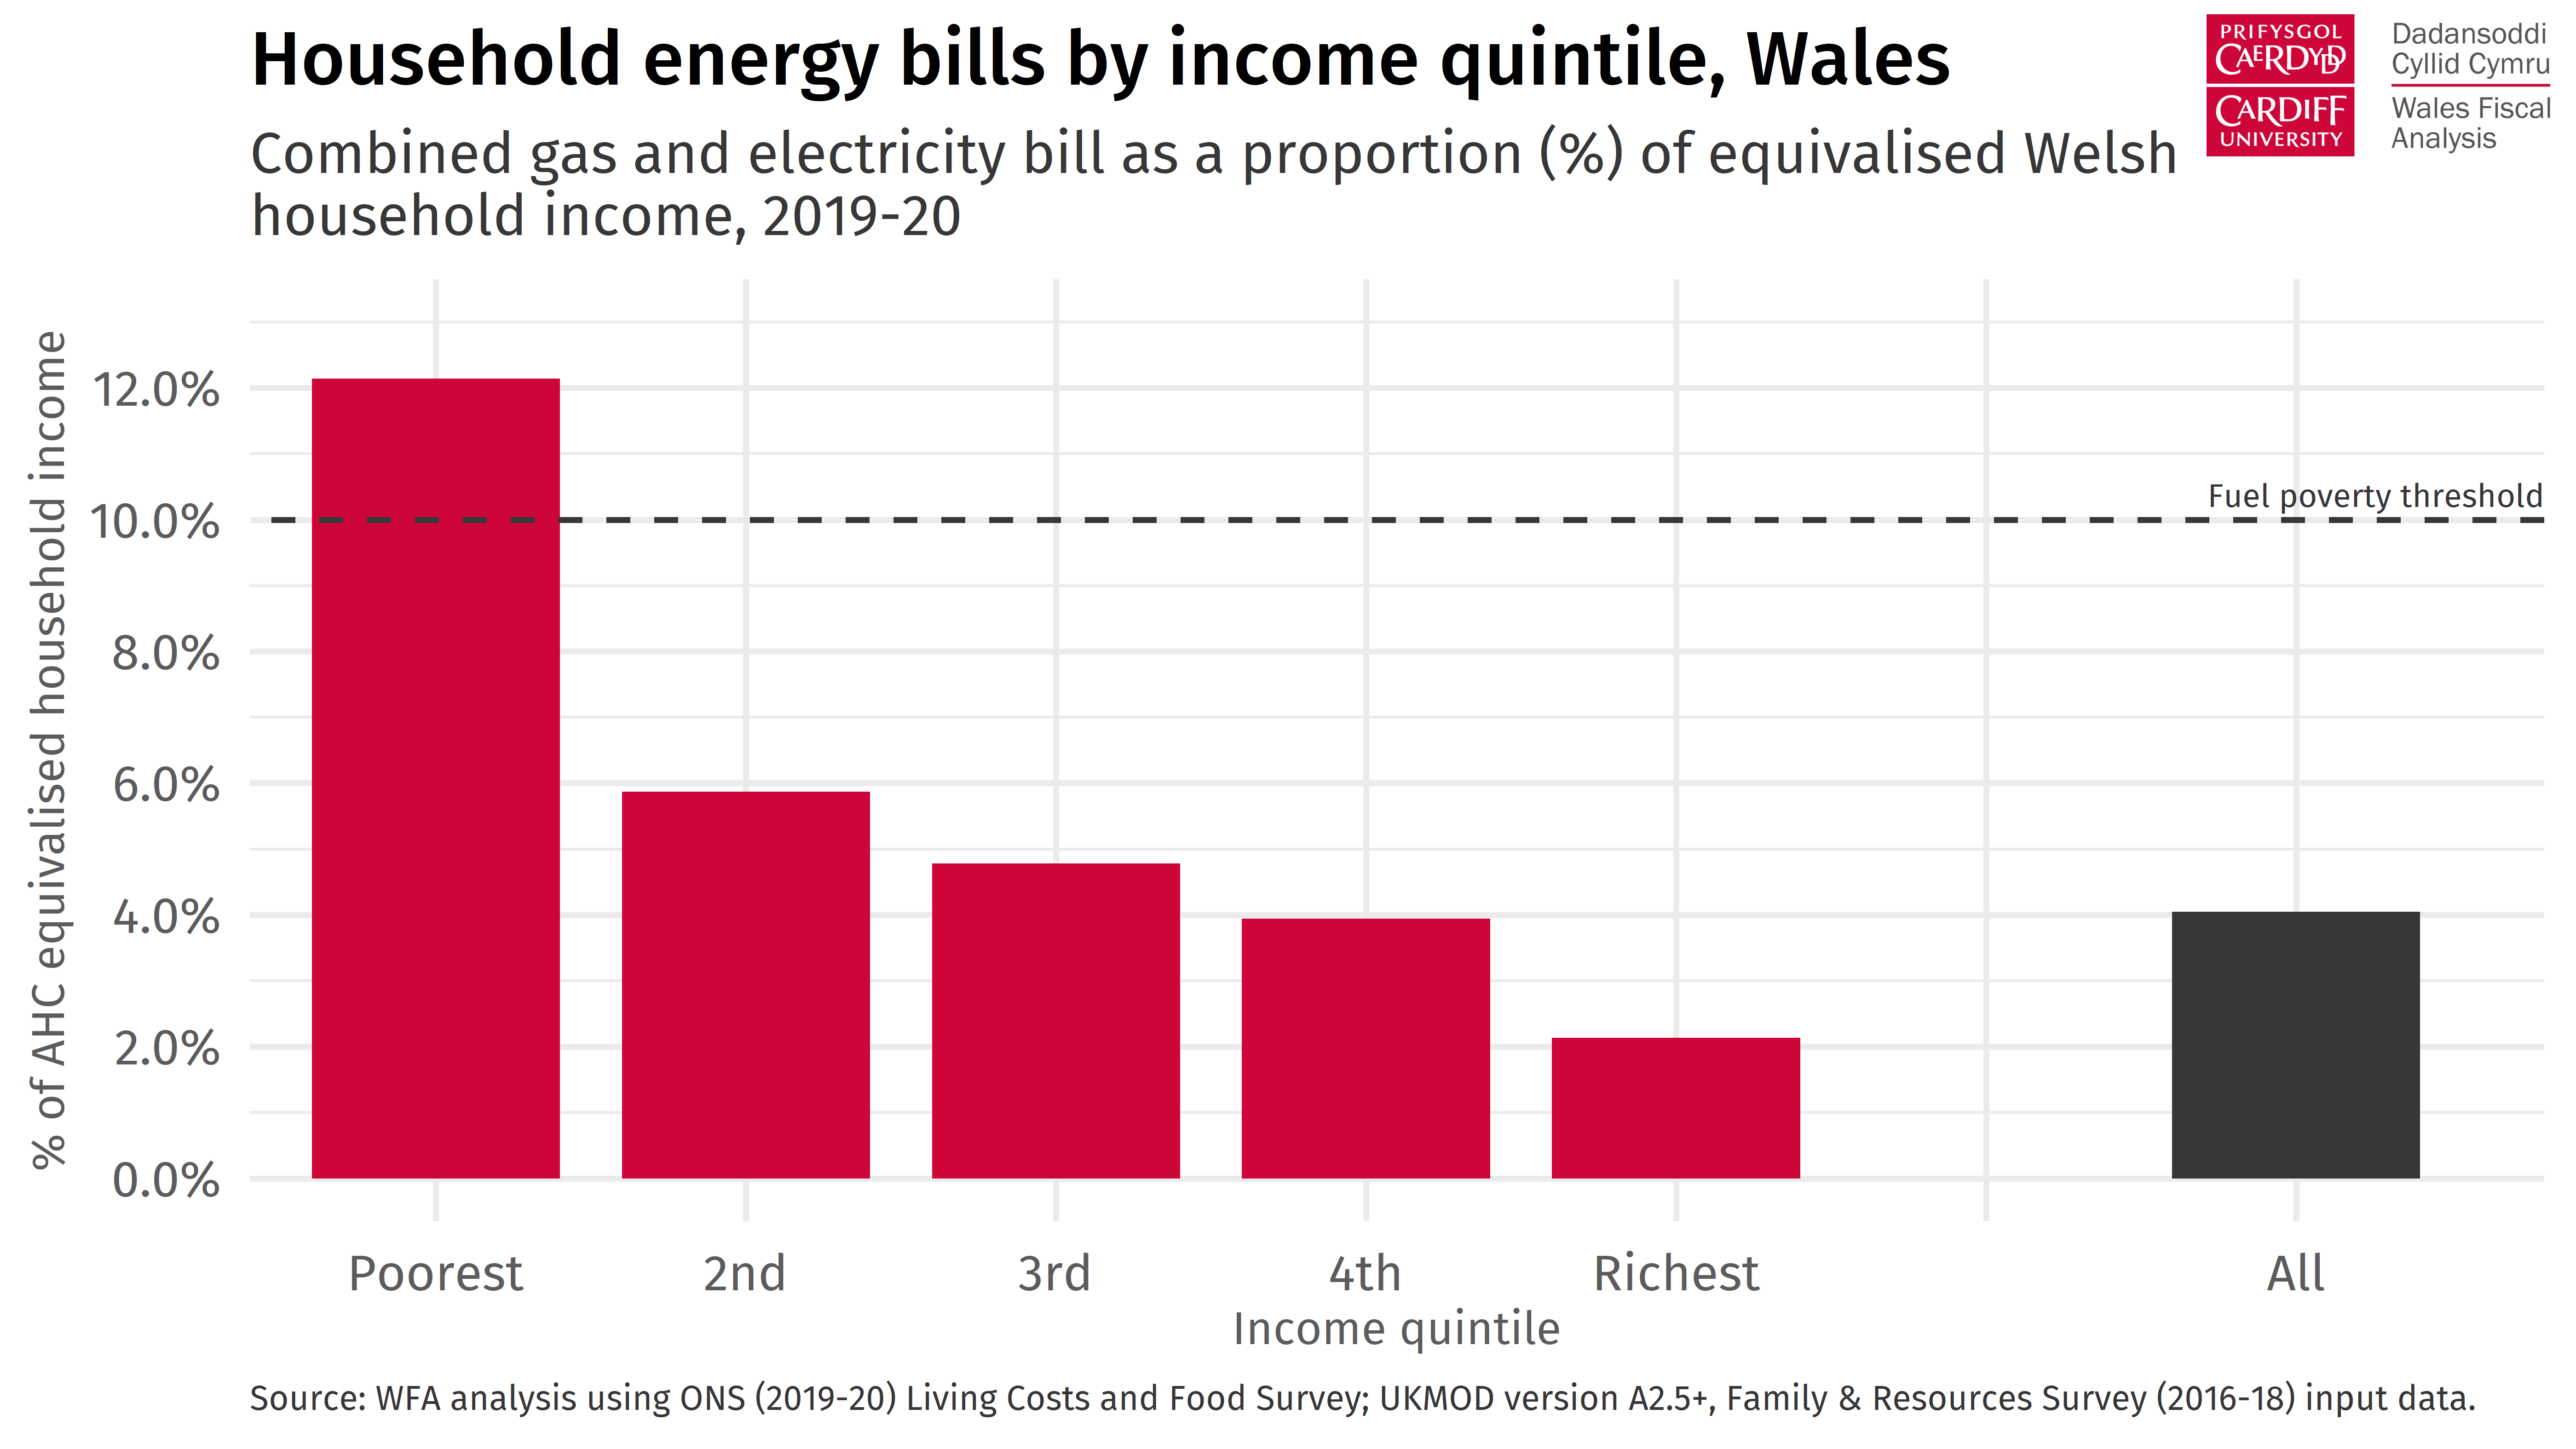 Bar chart showing the estimated amount spent by Welsh households on their energy bills as a proportion of their income, by income quintile.